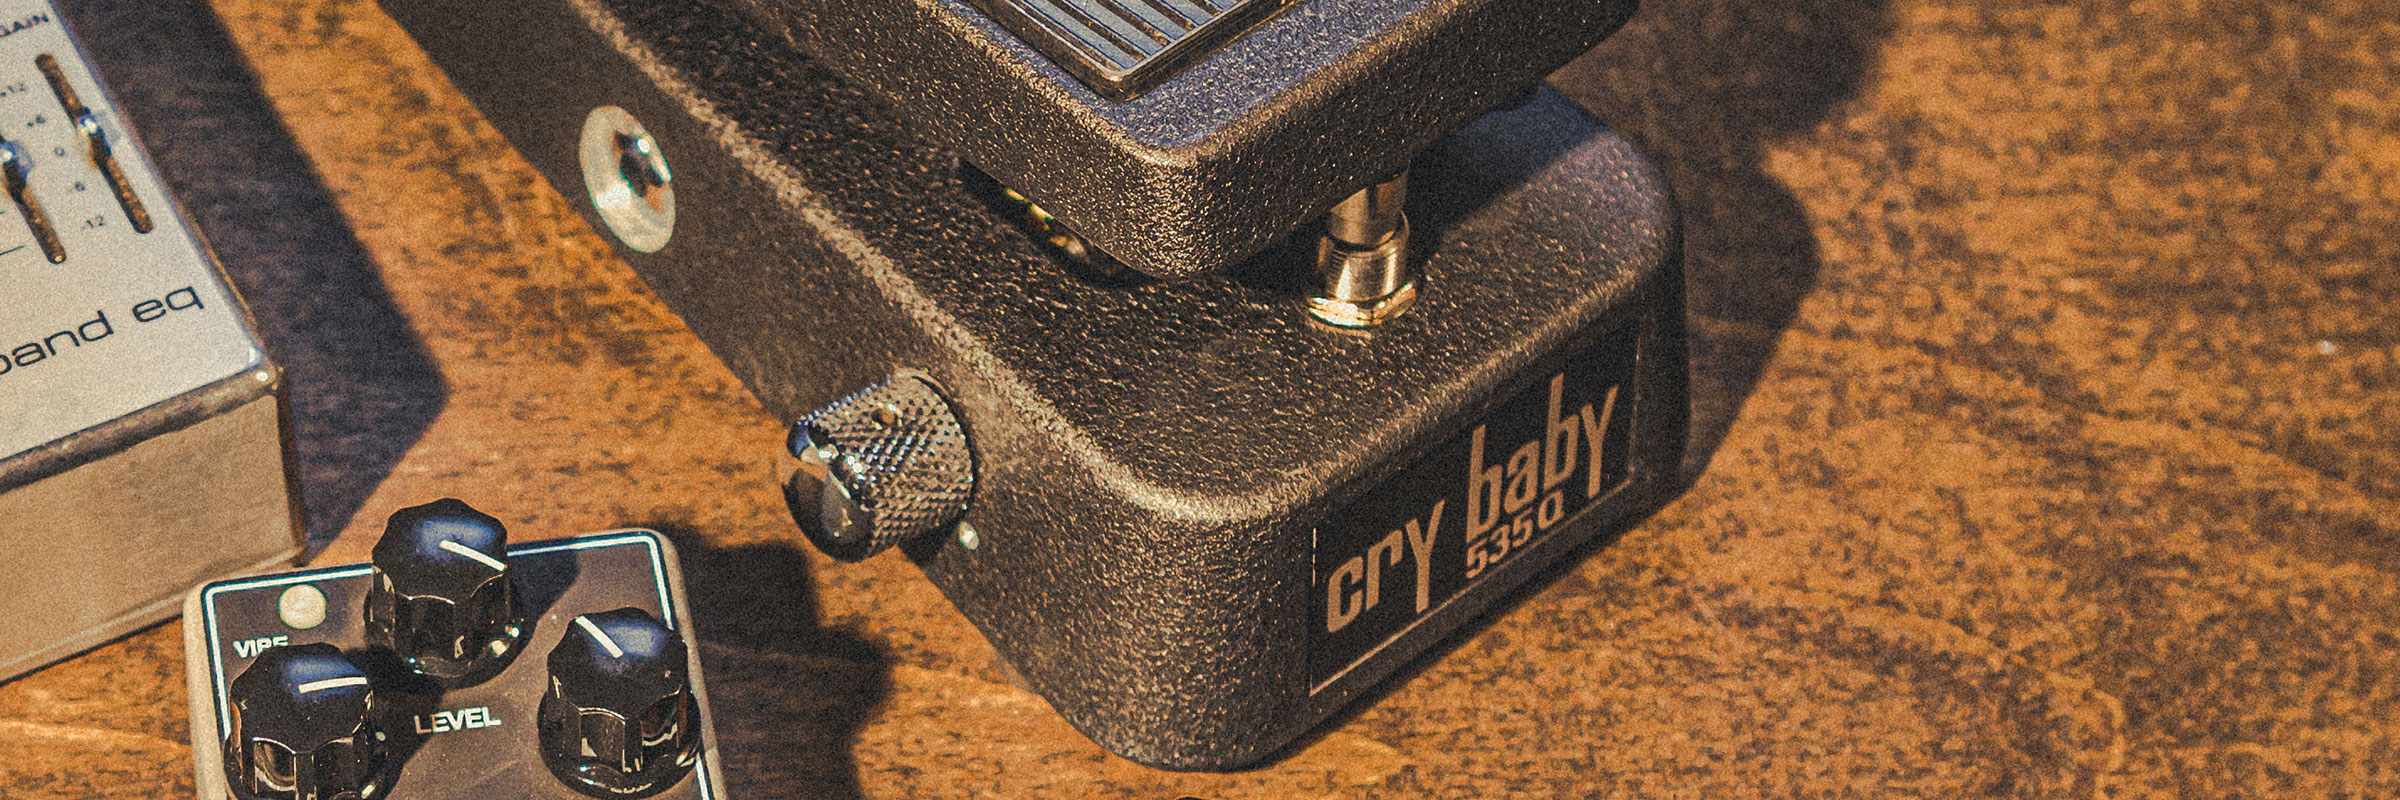 CRY BABY<sup>®</sup> 535Q MULTI-WAH